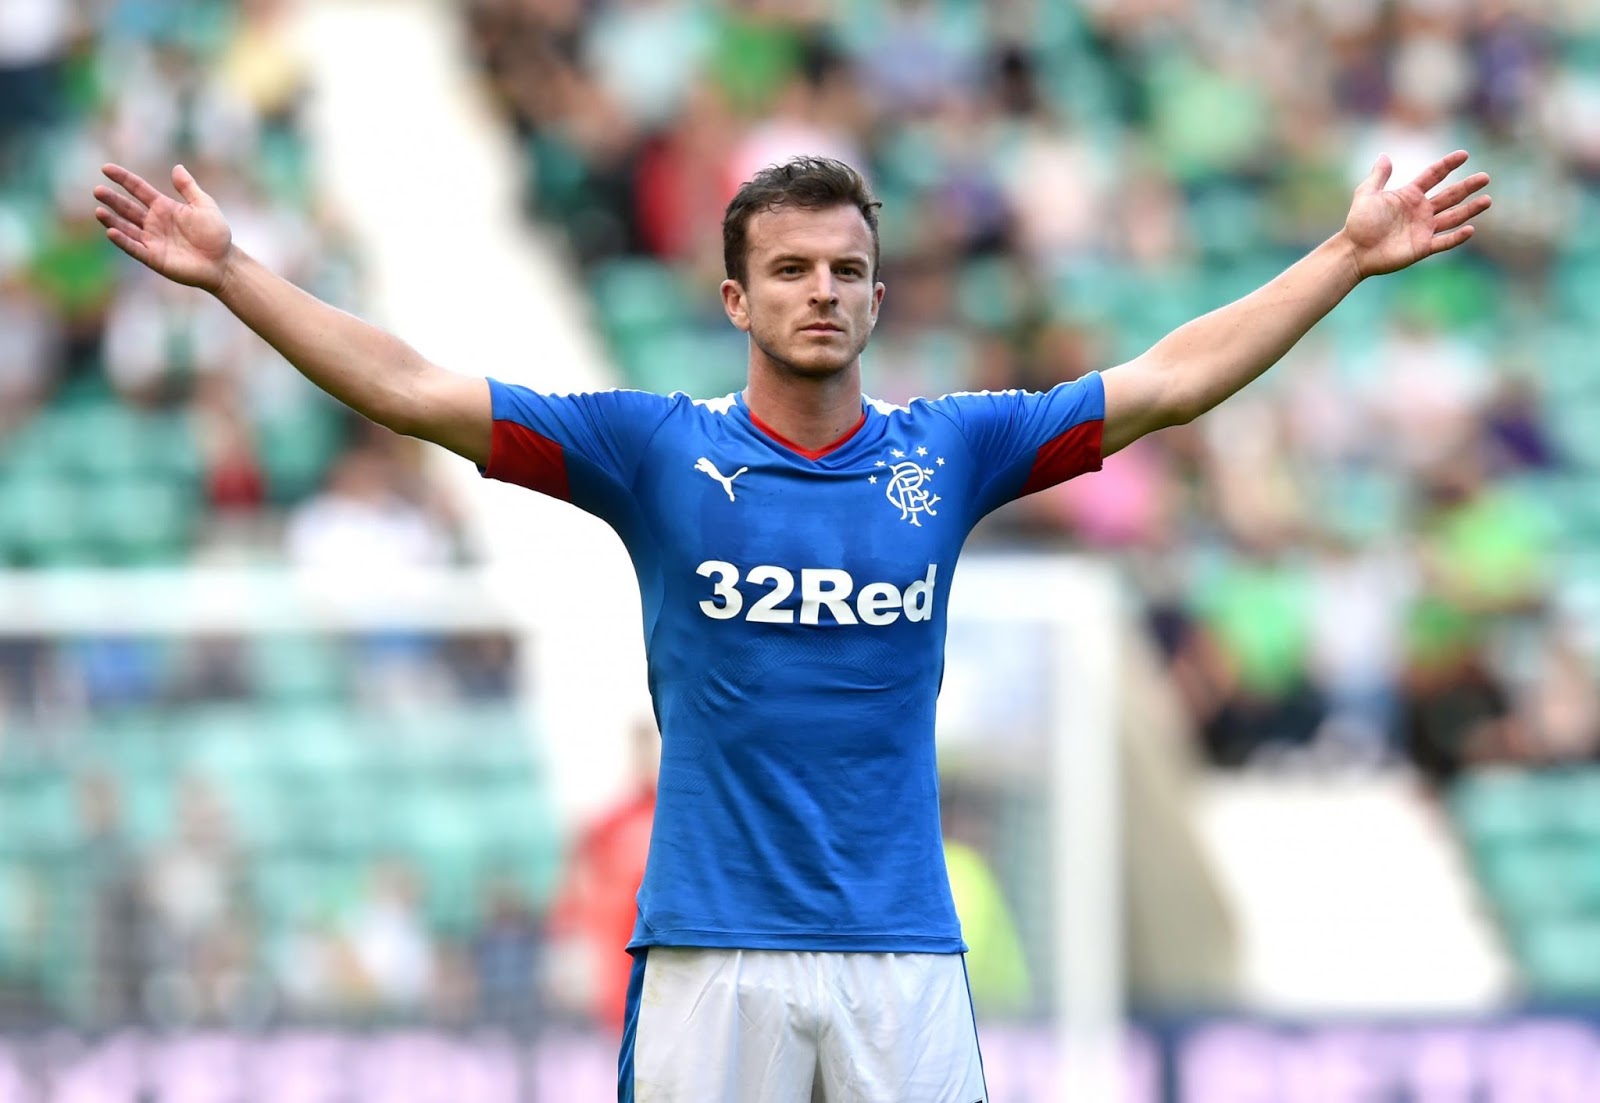 End of the road for this Ibrox star?